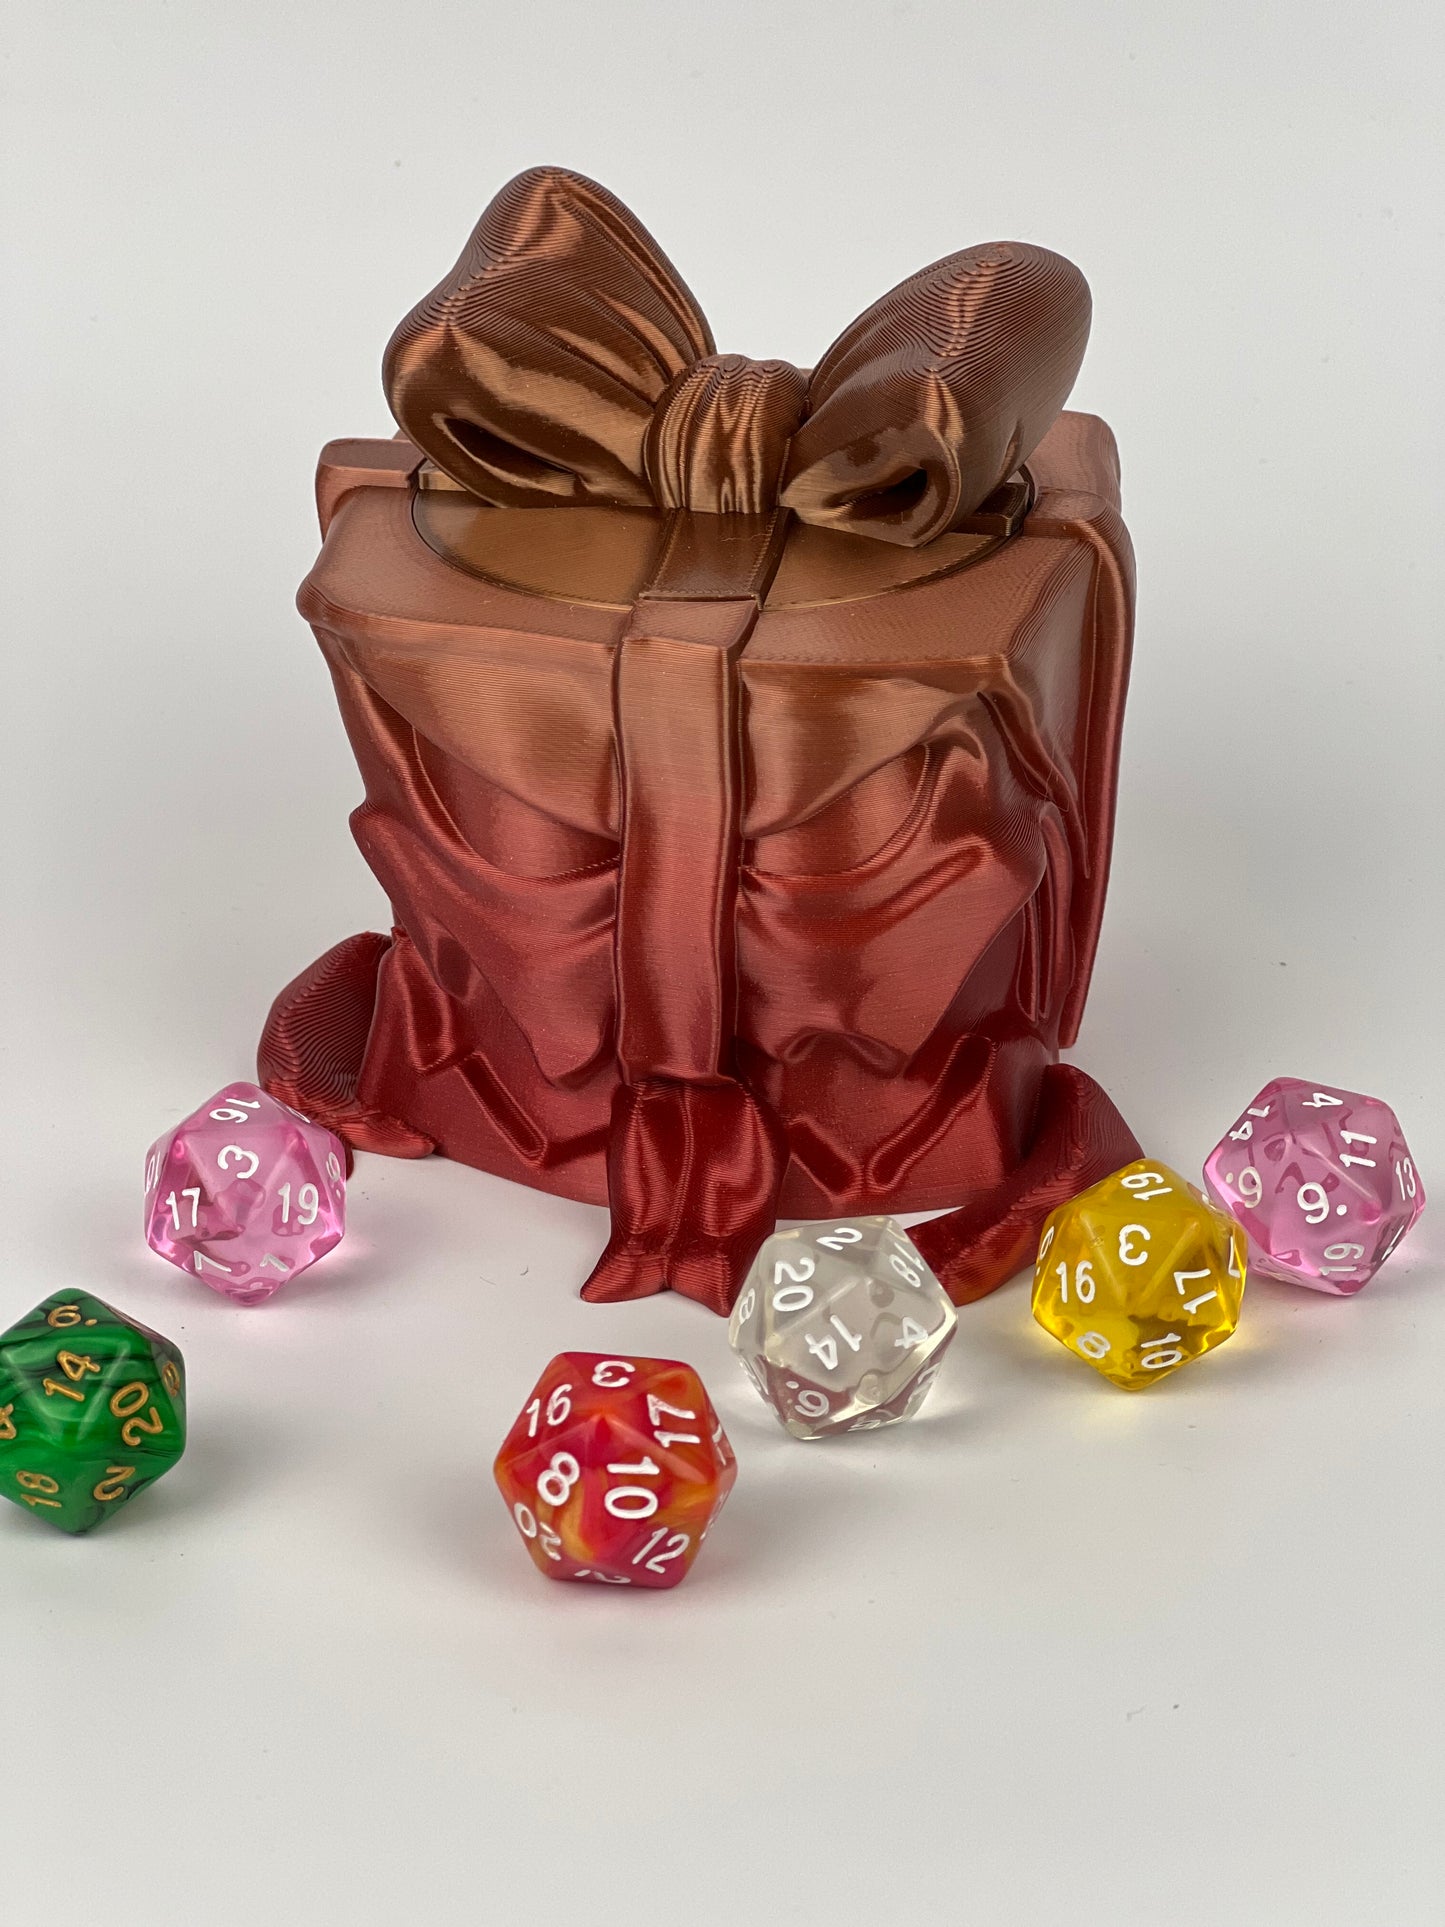 Mimic Gift Mythic Dice Box Limited Edition